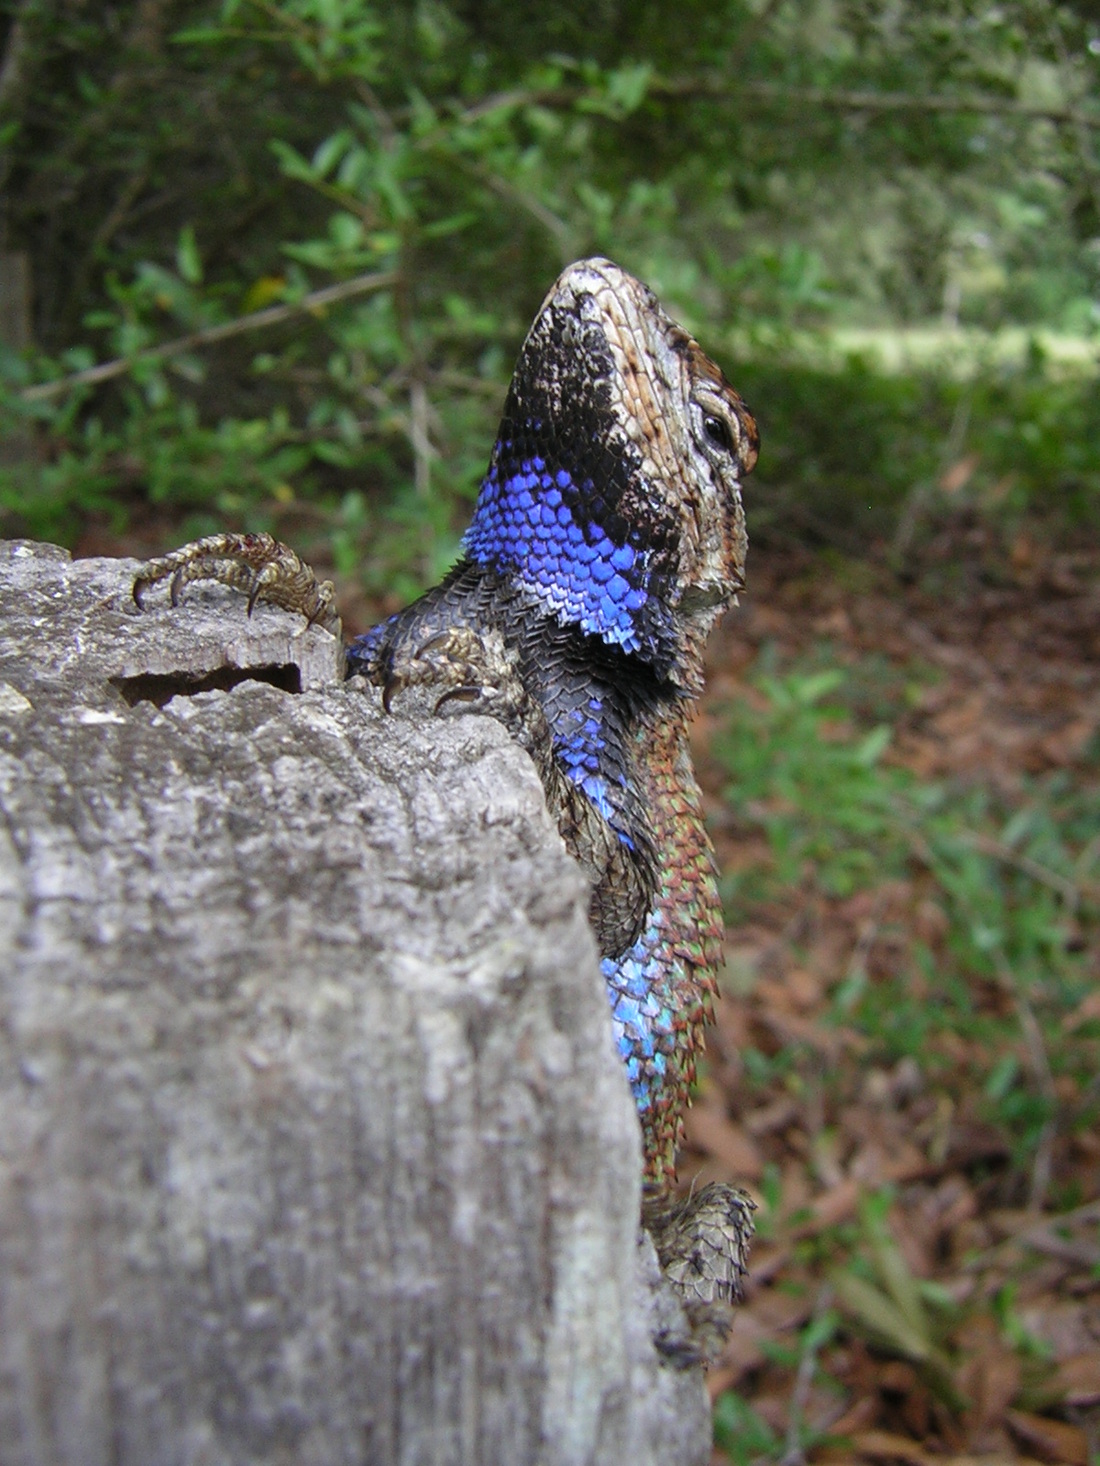 RESPIRATORY SYSTEM - The Northern Fence Lizard